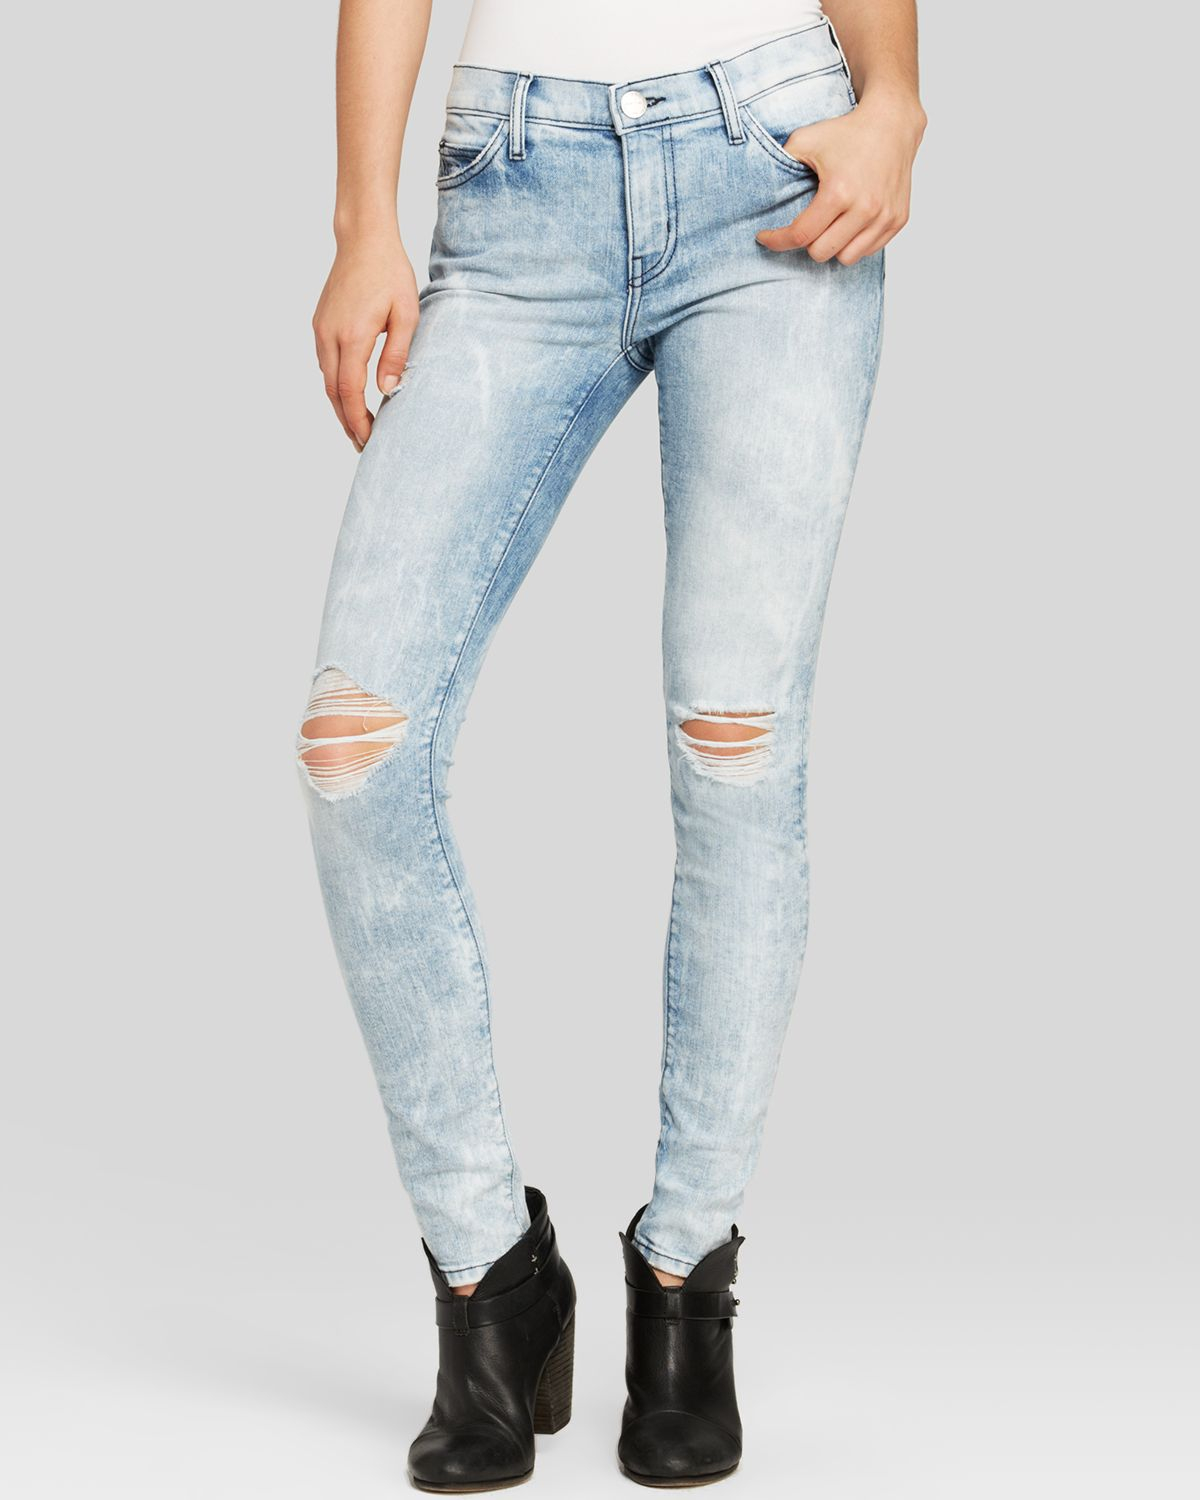 currentelliott-silver-jeans-the-ankle-skinny-in-city-bleach-destroy-product-1-26728475-3-484015067-normal.jpeg